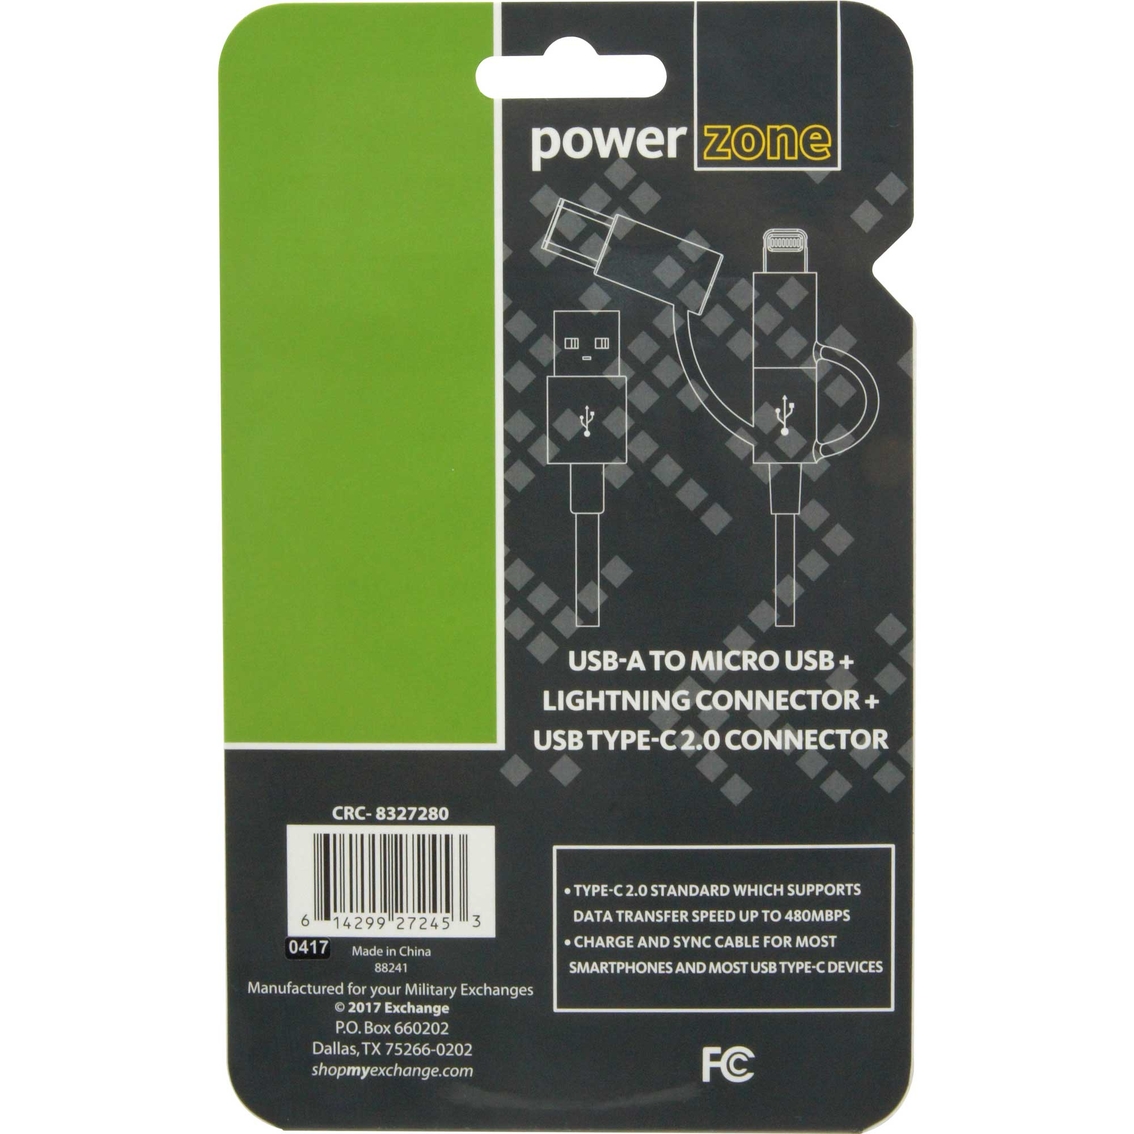 Powerzone 3-in-1 Type C Cable 3 ft. - Image 5 of 5